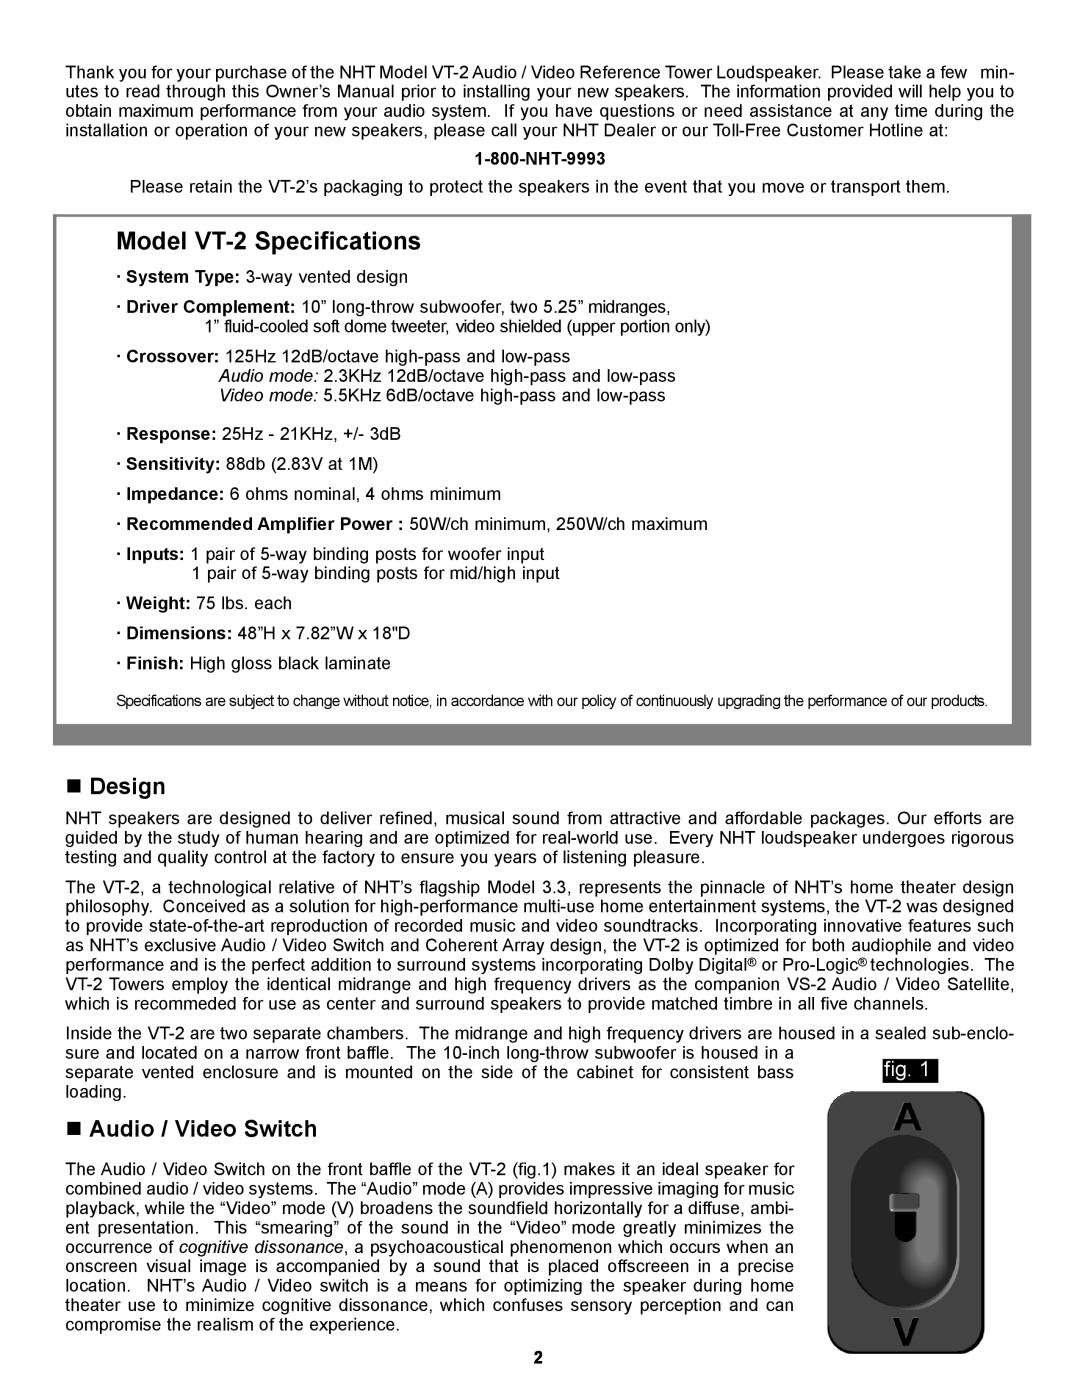 NHT owner manual Model VT-2Specifications, „Design, „Audio / Video Switch 